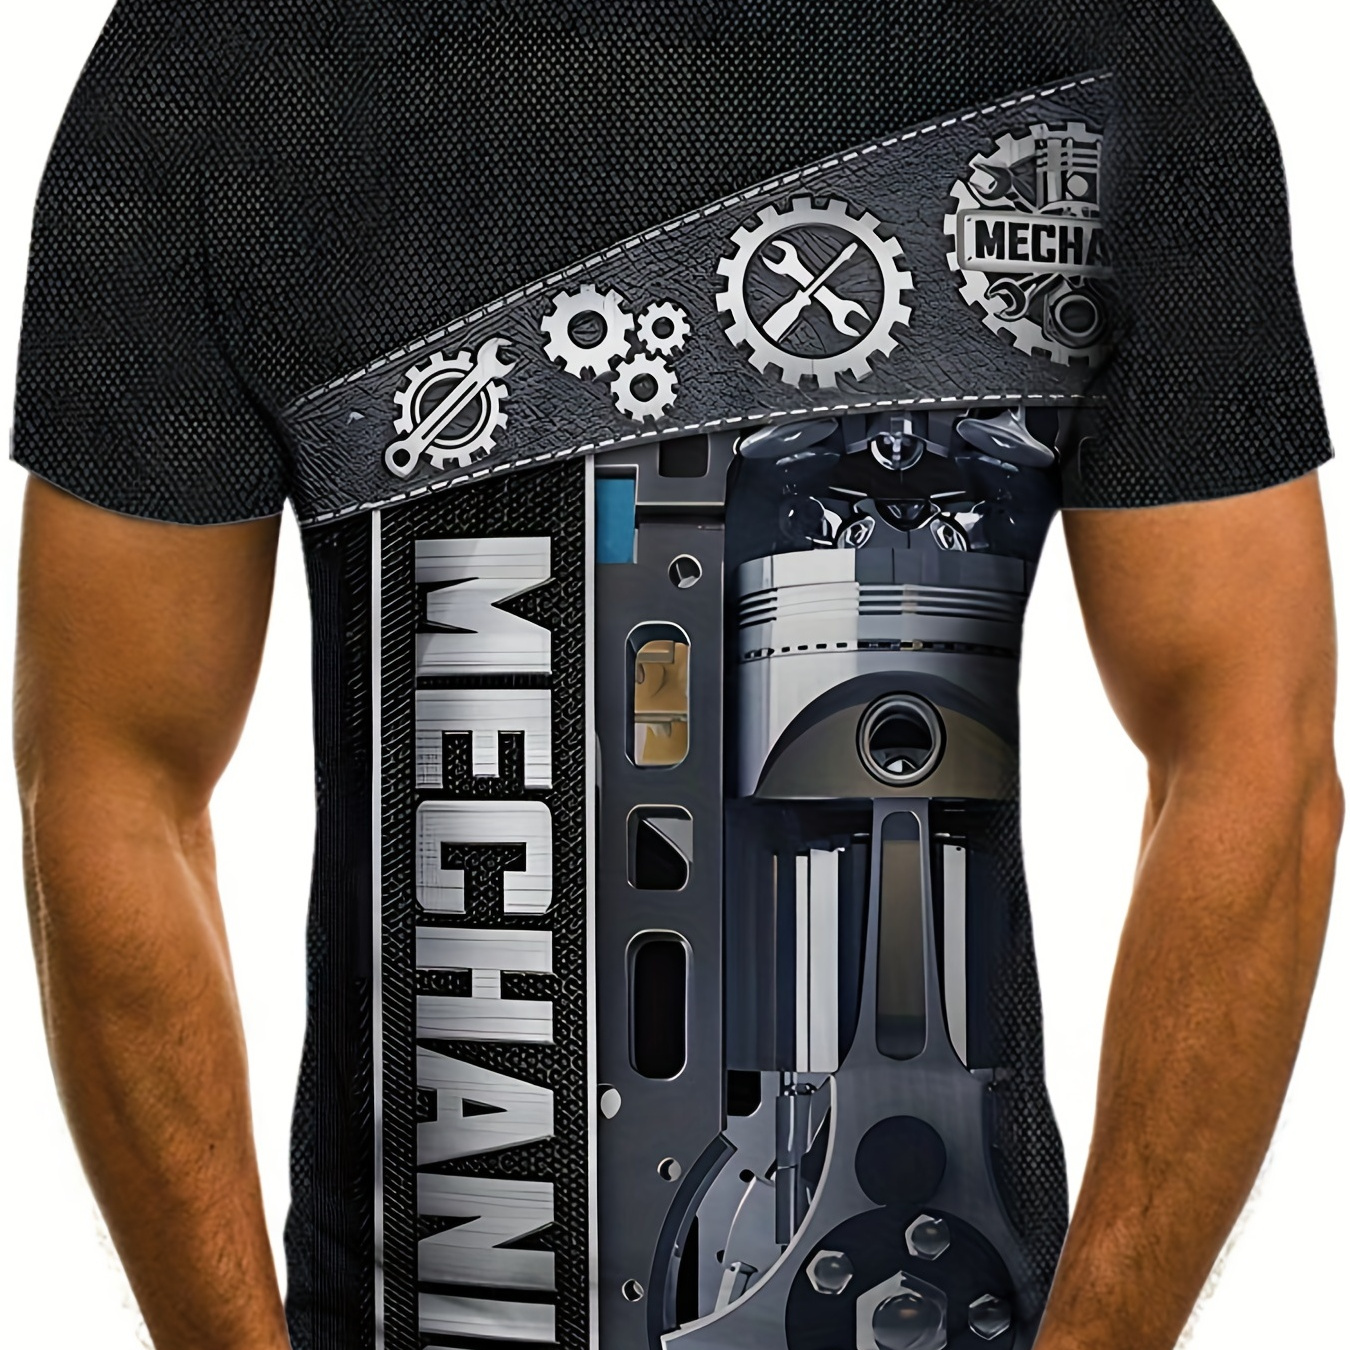 

Mechanic Tool Box Print T-shirt, Men's Casual Street Style Stretch Round Neck Tee Shirt For Summer